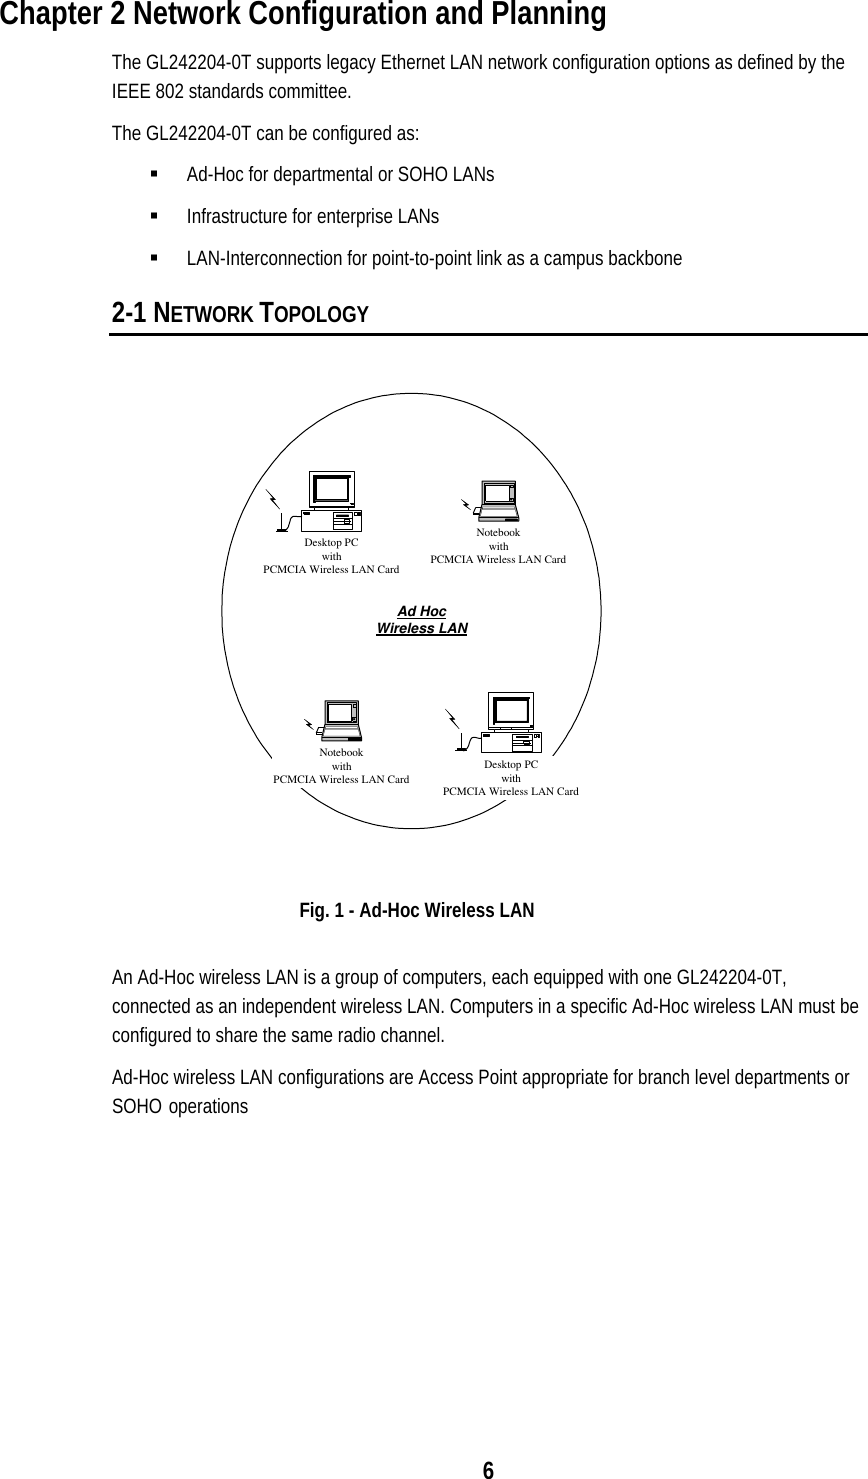 6Chapter 2 Network Configuration and PlanningThe GL242204-0T supports legacy Ethernet LAN network configuration options as defined by theIEEE 802 standards committee.The GL242204-0T can be configured as:§ Ad-Hoc for departmental or SOHO LANs§ Infrastructure for enterprise LANs§ LAN-Interconnection for point-to-point link as a campus backbone2-1 NETWORK TOPOLOGYDesktop PCwithPCMCIA Wireless LAN CardDesktop PCwithPCMCIA Wireless LAN CardNotebookwithPCMCIA Wireless LAN CardNotebookwithPCMCIA Wireless LAN CardAd HocWireless LANFig. 1 - Ad-Hoc Wireless LANAn Ad-Hoc wireless LAN is a group of computers, each equipped with one GL242204-0T,connected as an independent wireless LAN. Computers in a specific Ad-Hoc wireless LAN must beconfigured to share the same radio channel.Ad-Hoc wireless LAN configurations are Access Point appropriate for branch level departments orSOHO operations